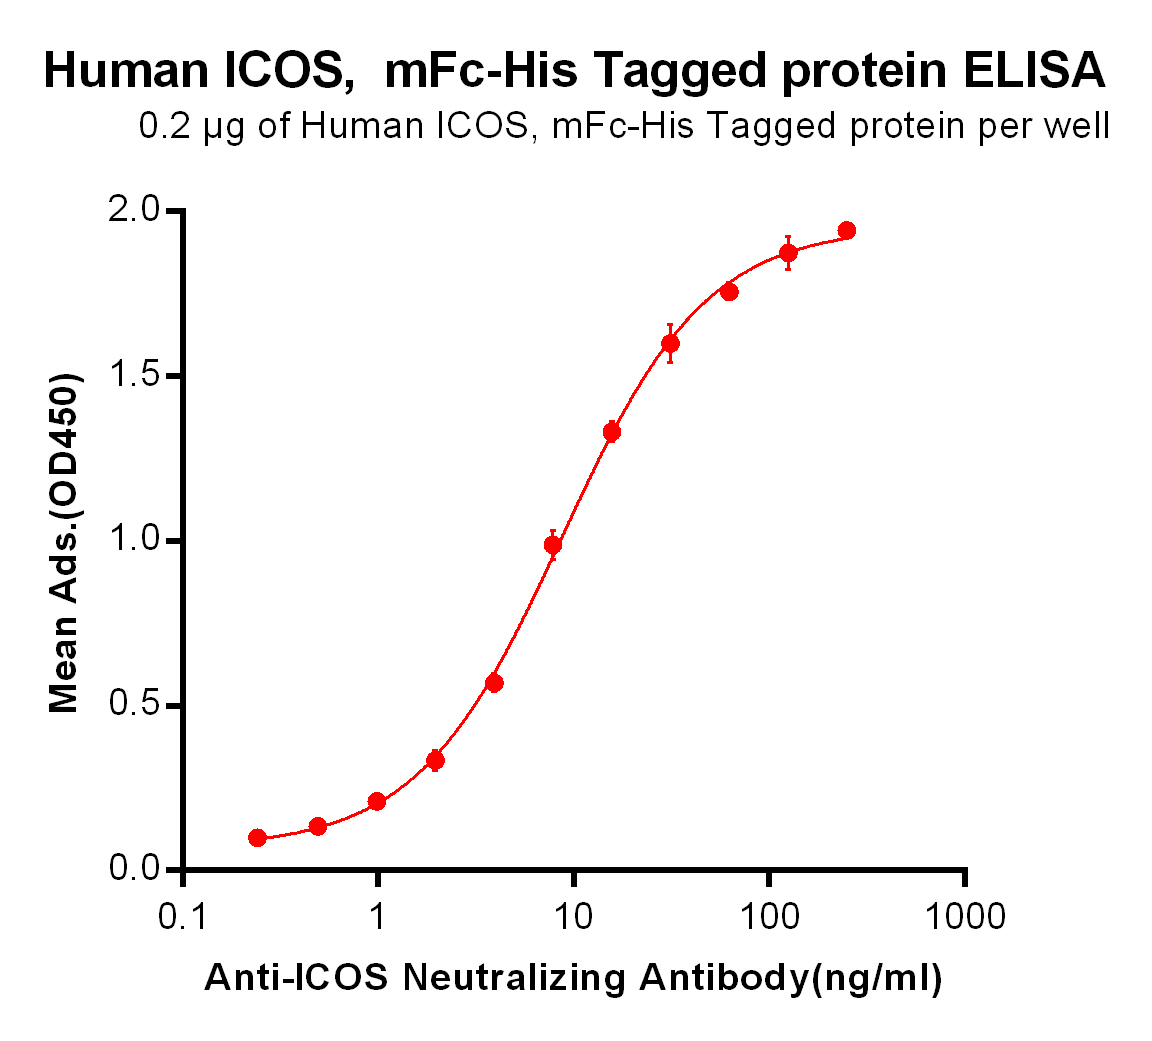 Human ICOS Protein, mFc-His tag